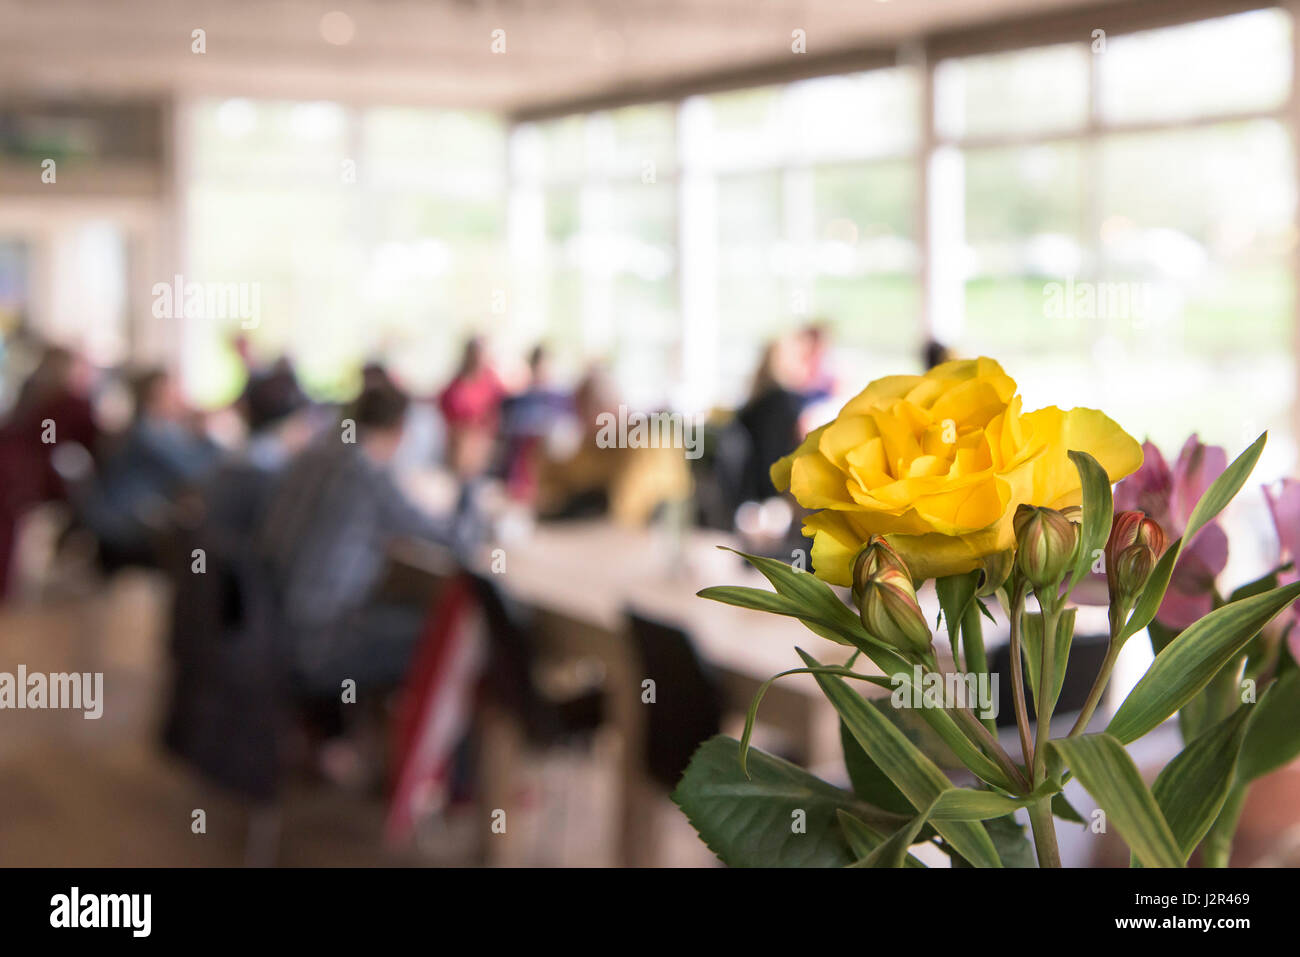 Restaurant interior Flower Yellow Rose Bloom Table decorations Decorated Pretty Colourful Colorful Stock Photo